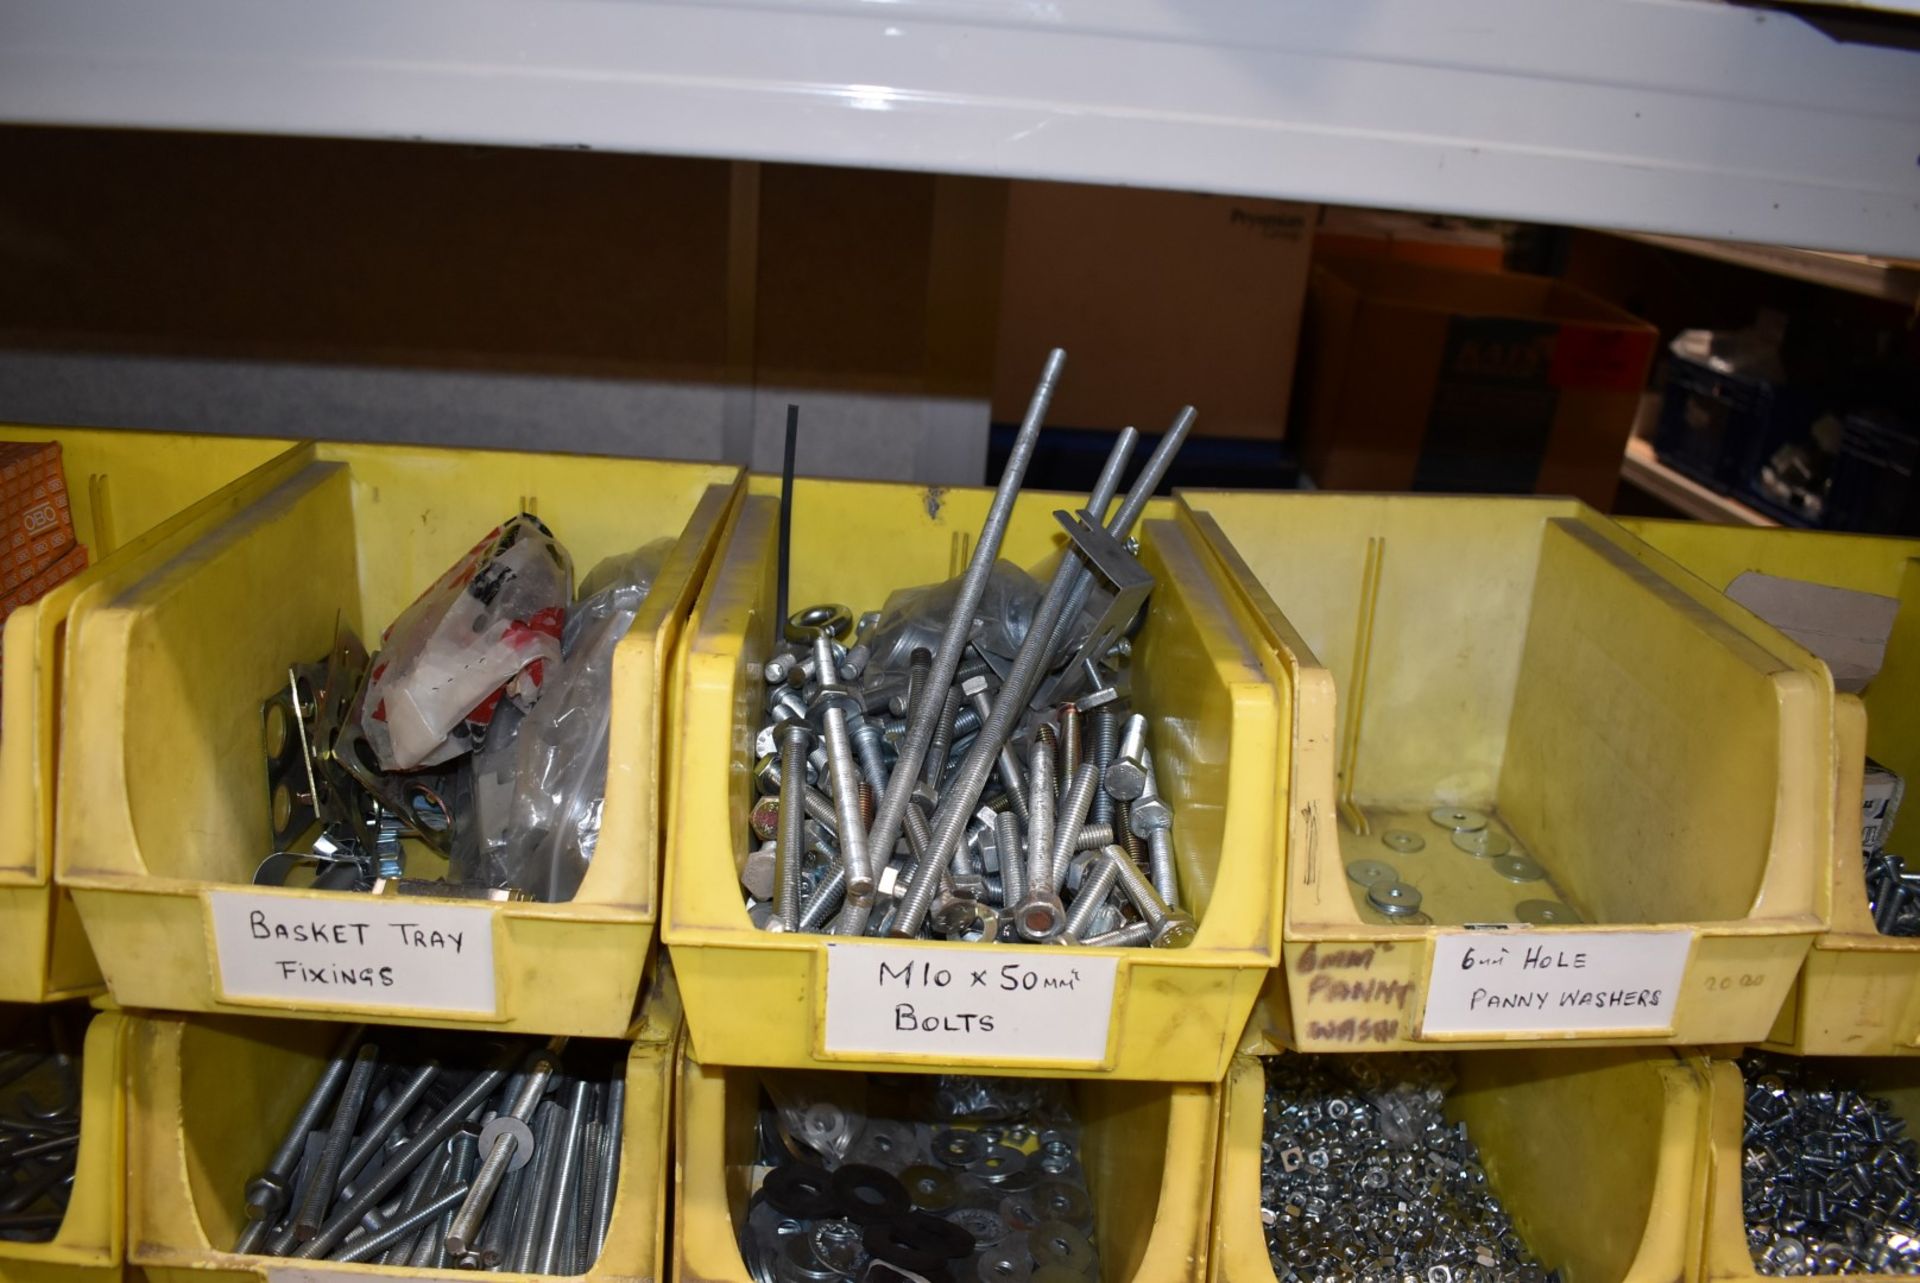 43 x Linbins With Contents - Clamps, Rod Connectors, Zebs, Washers, Bolts, Hex Nuts, Cleats & More! - Image 25 of 37